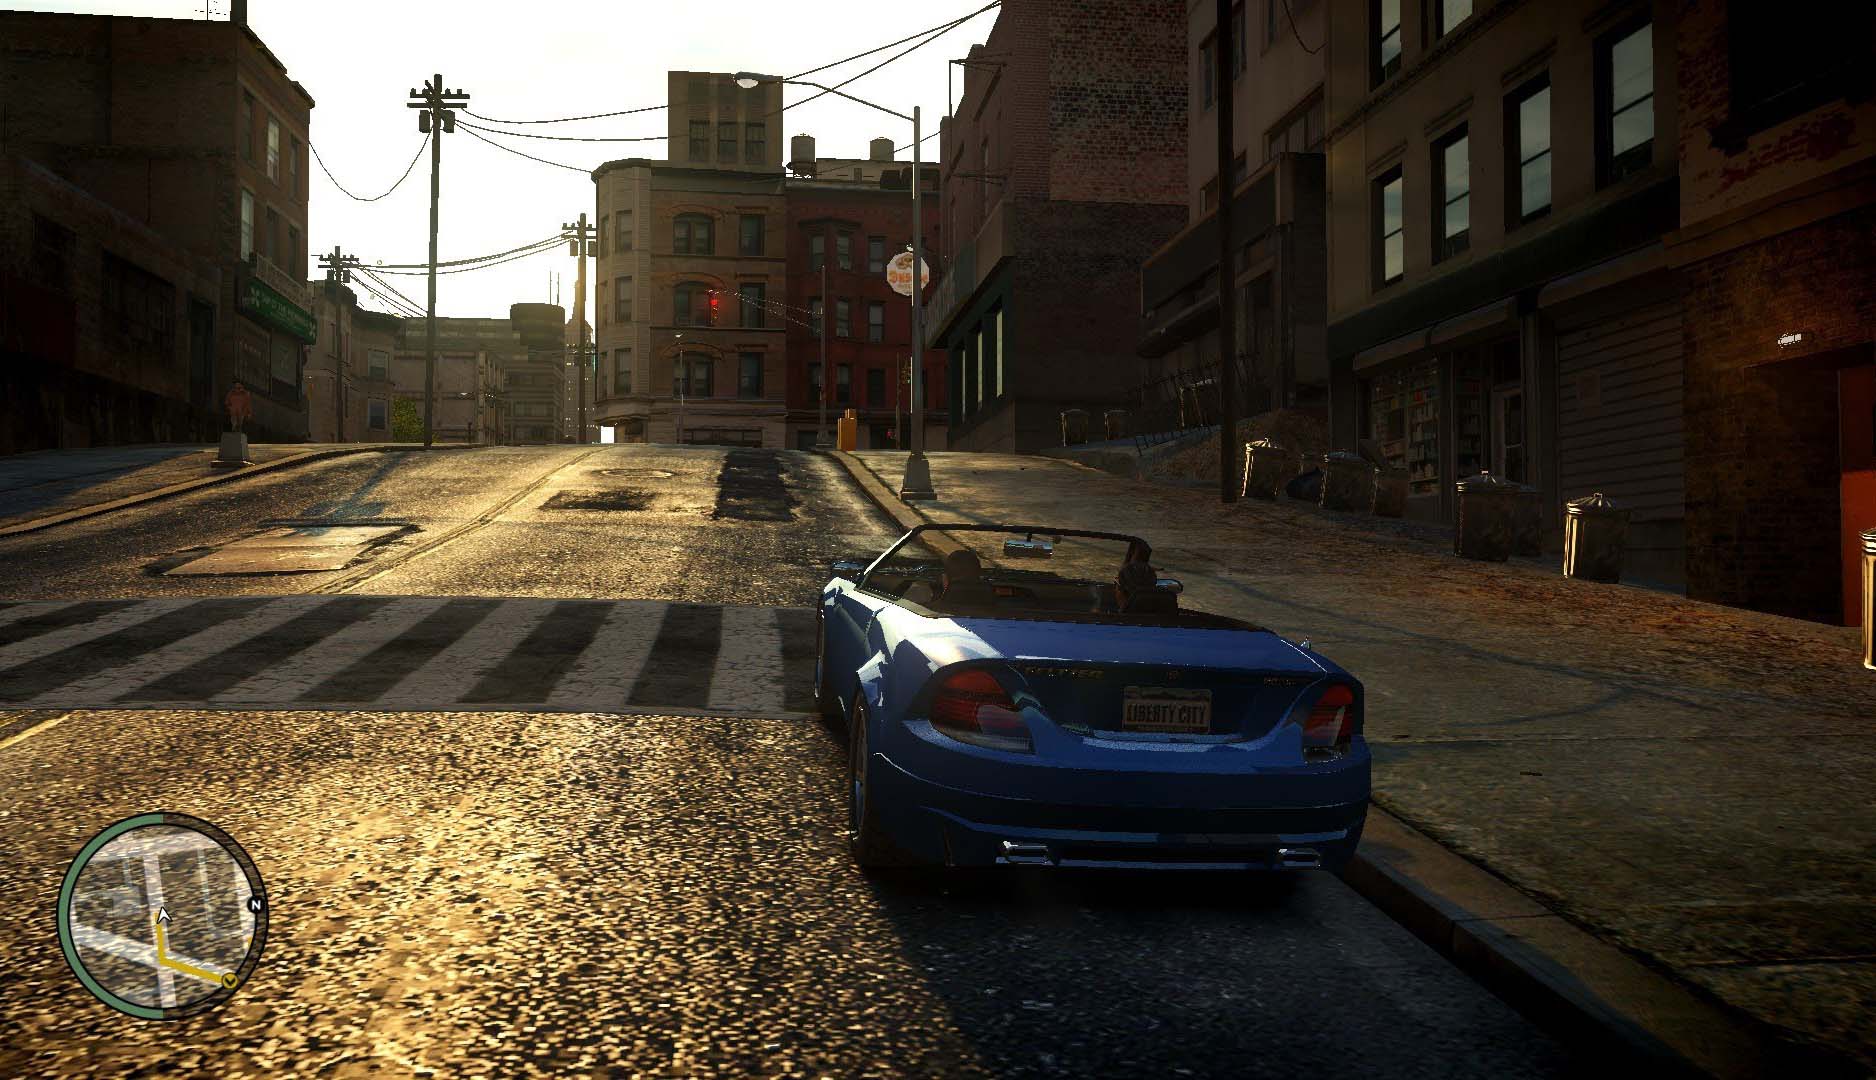 Grand Theft Auto IV Wallpapers